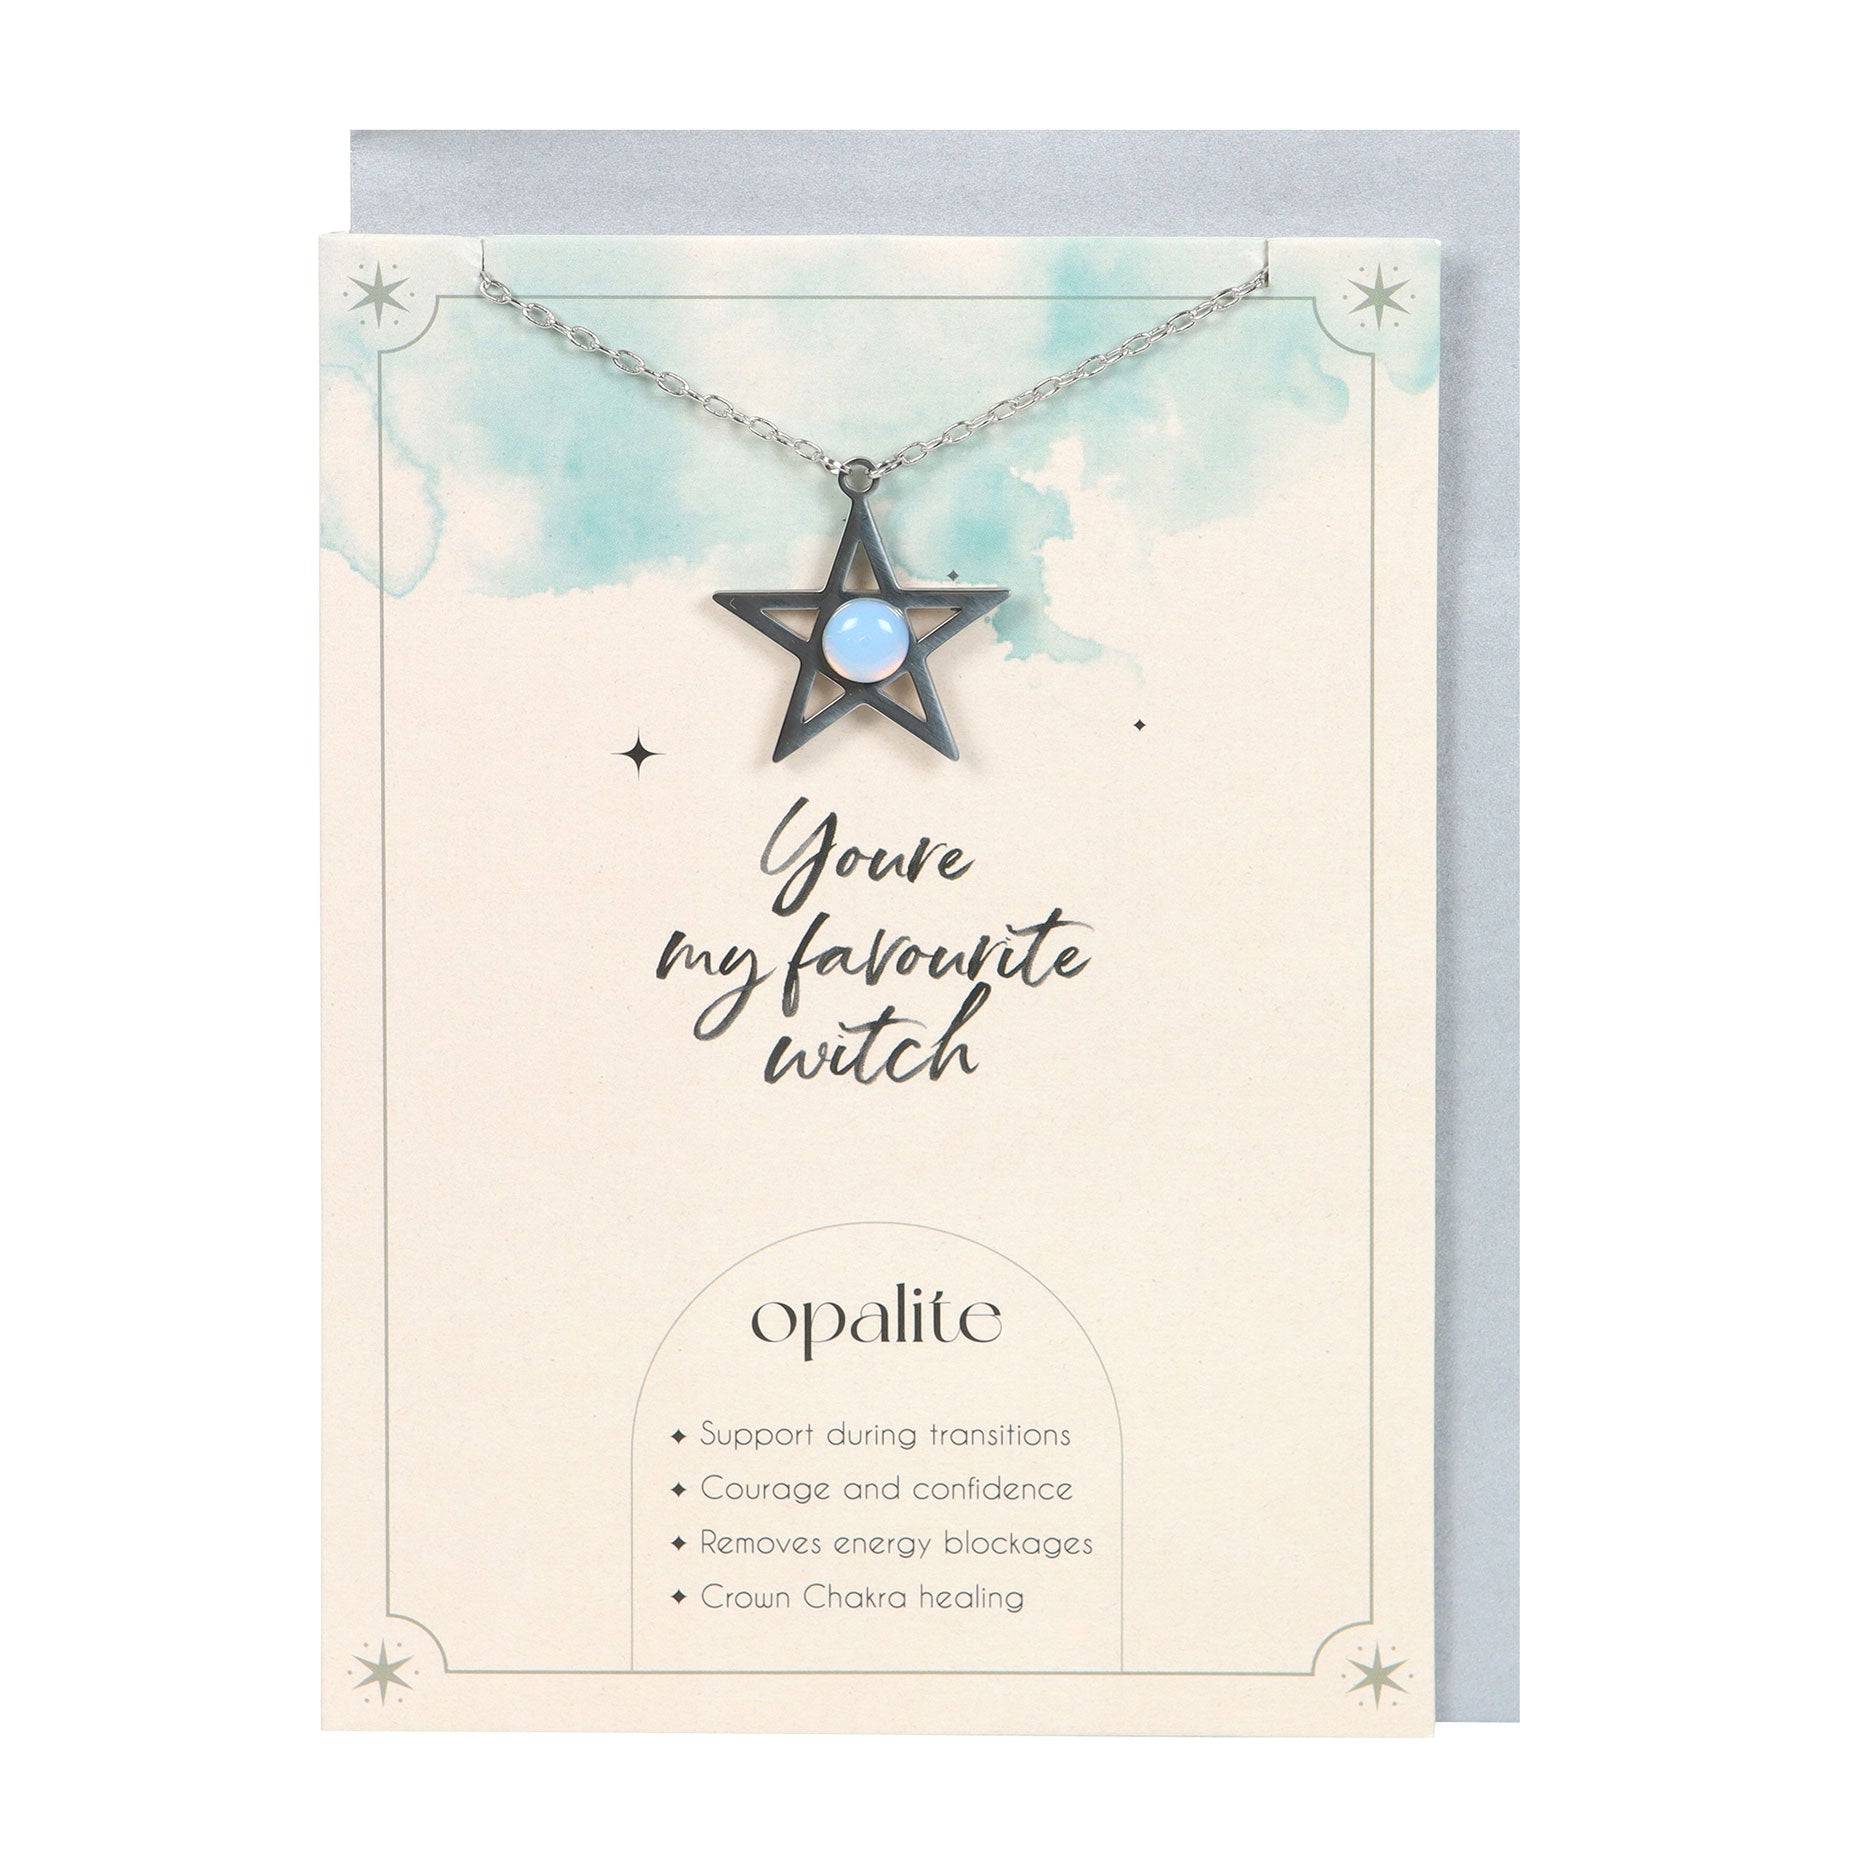 View Opalite Star Necklace Card information